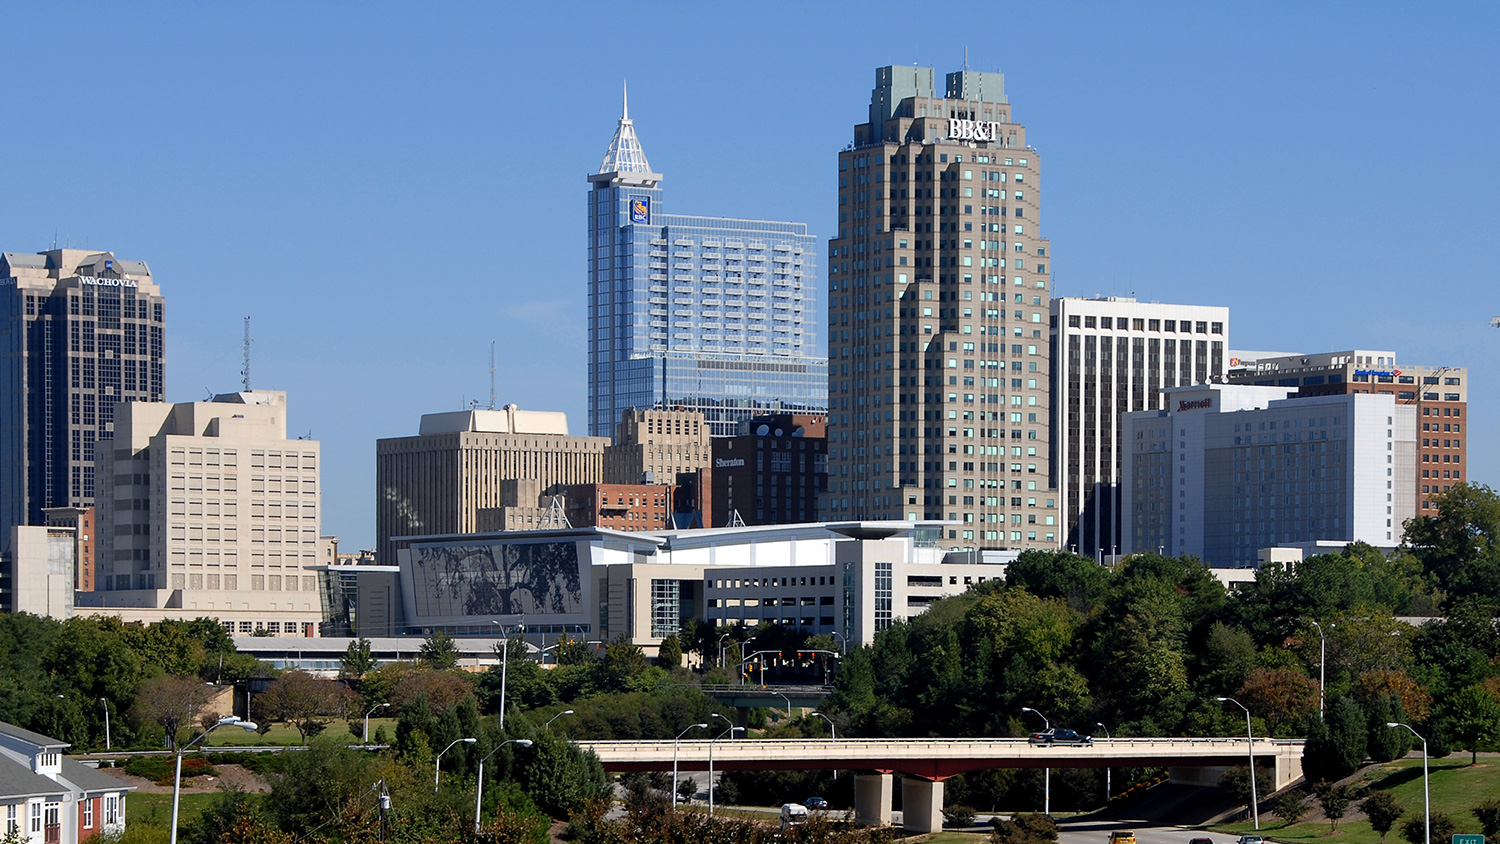 Downtown Raleigh skyline on a bright day